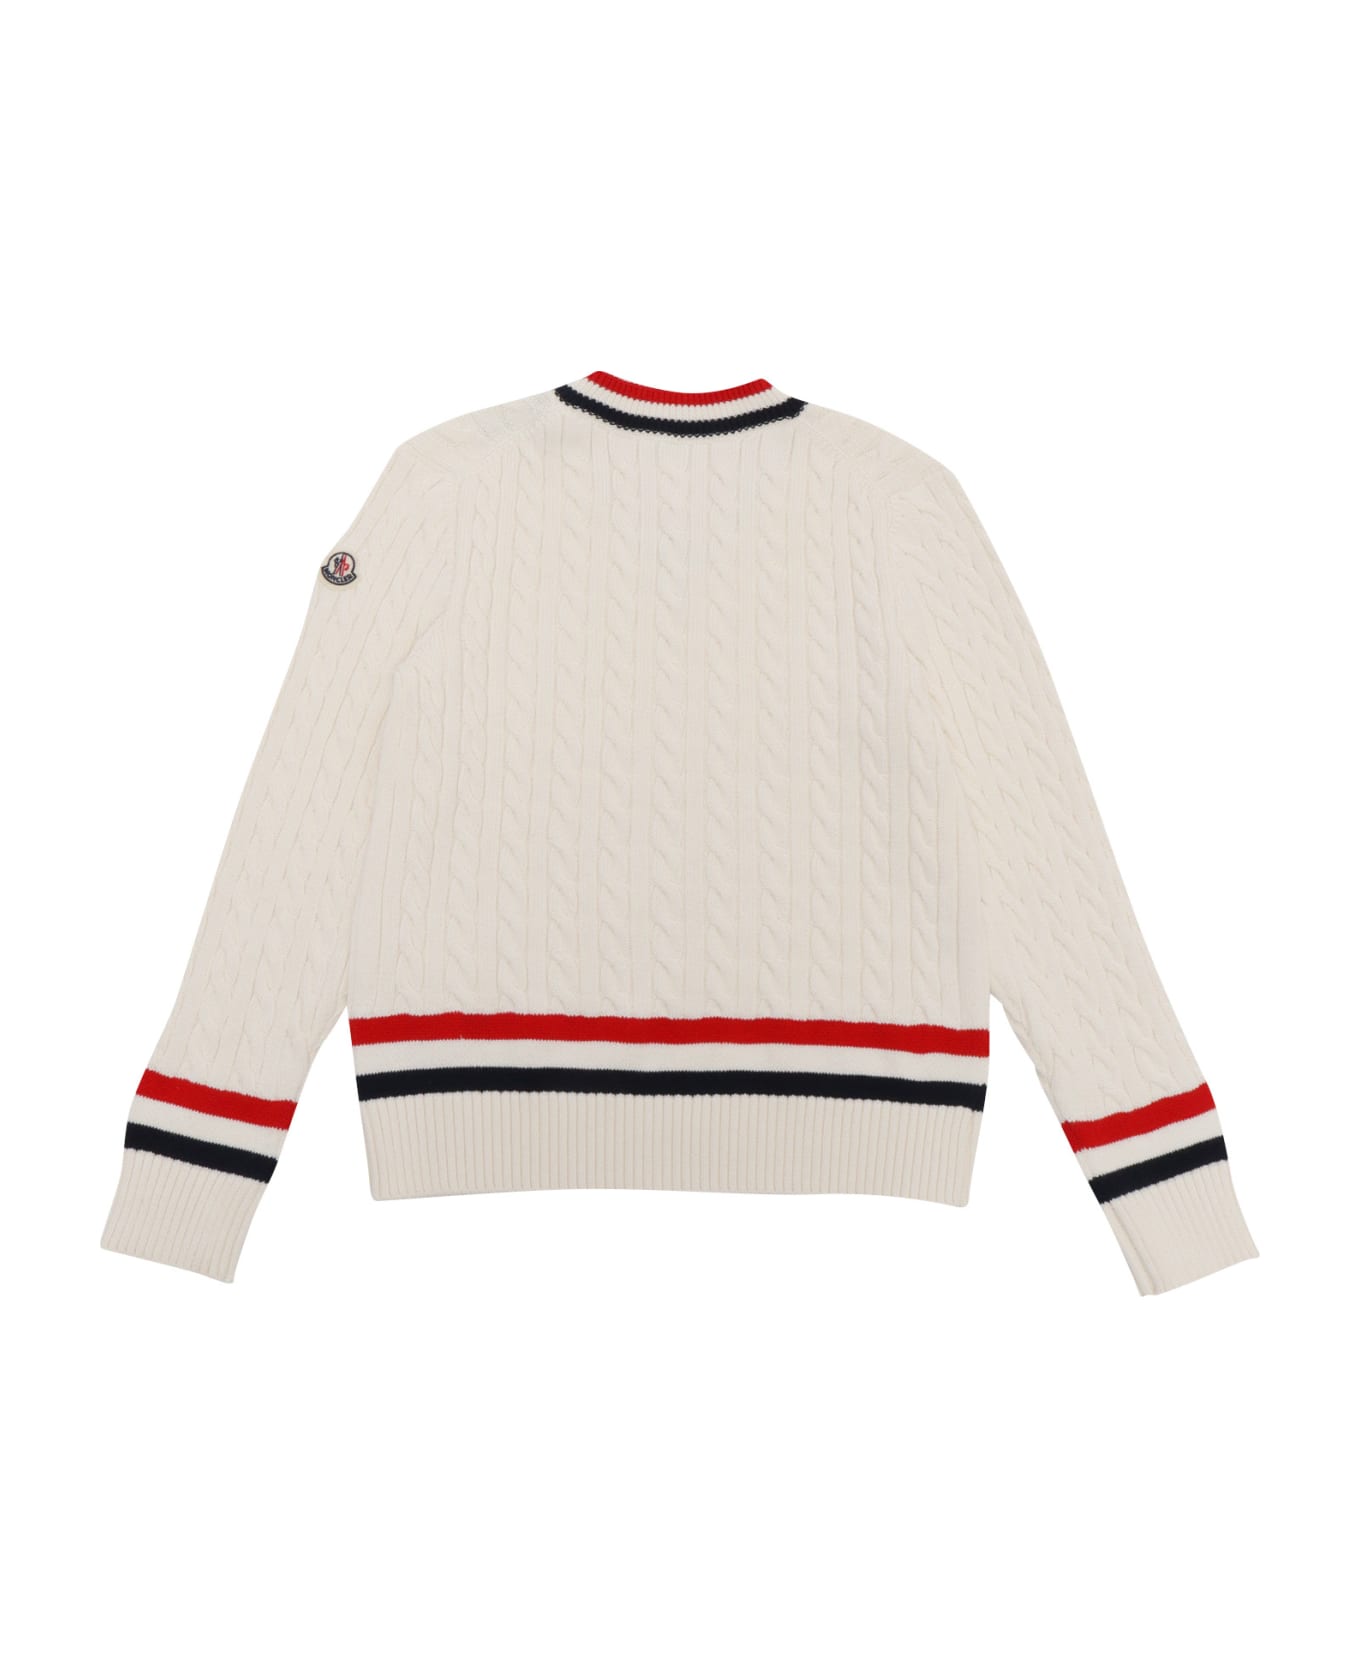 Moncler Baby Sweater - BEIGE